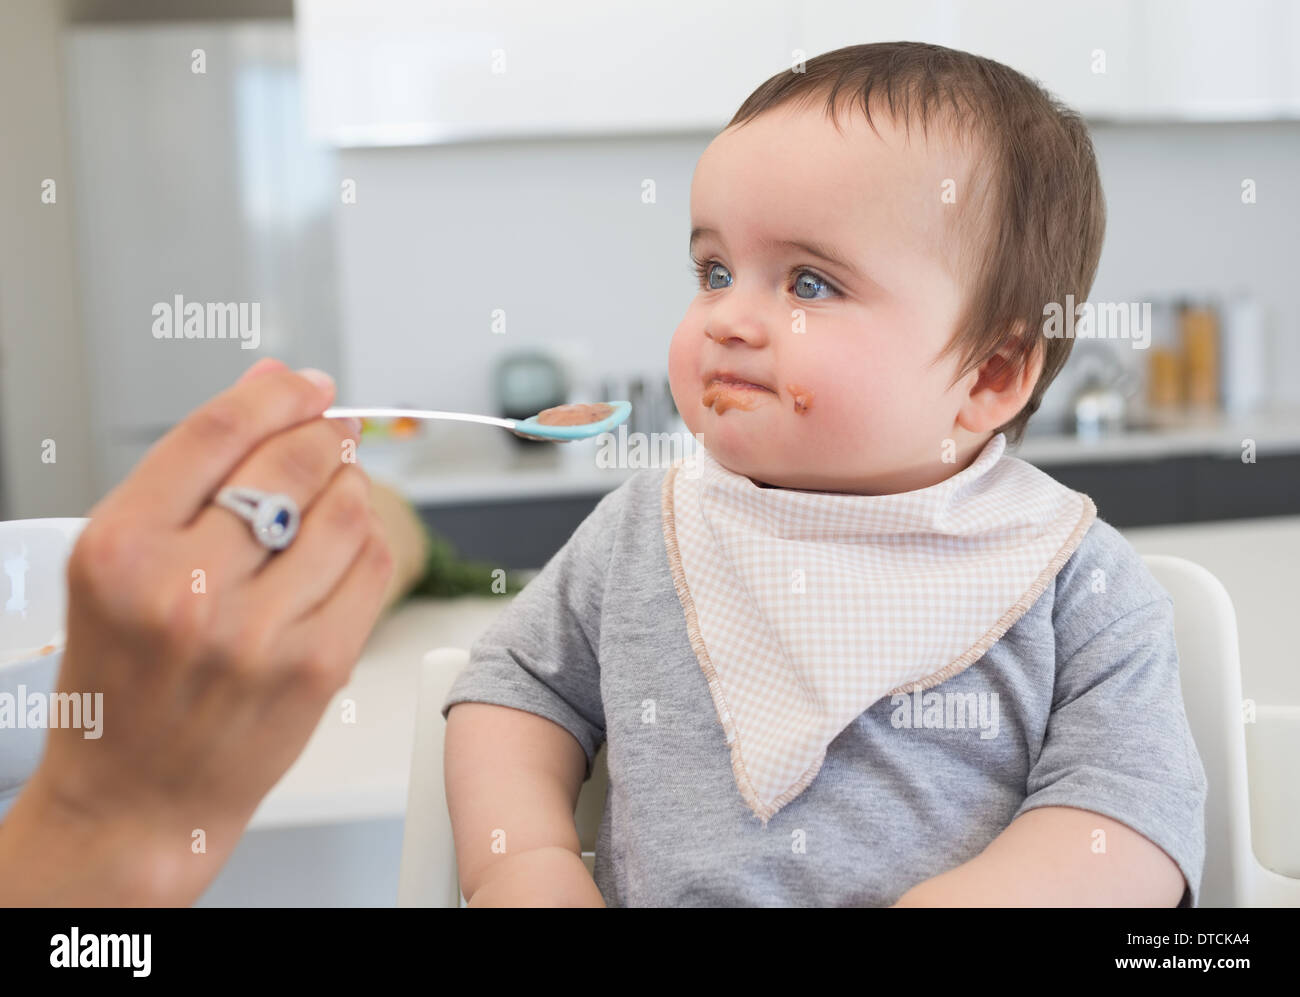 Innocent baby being fed by mother Stock Photo